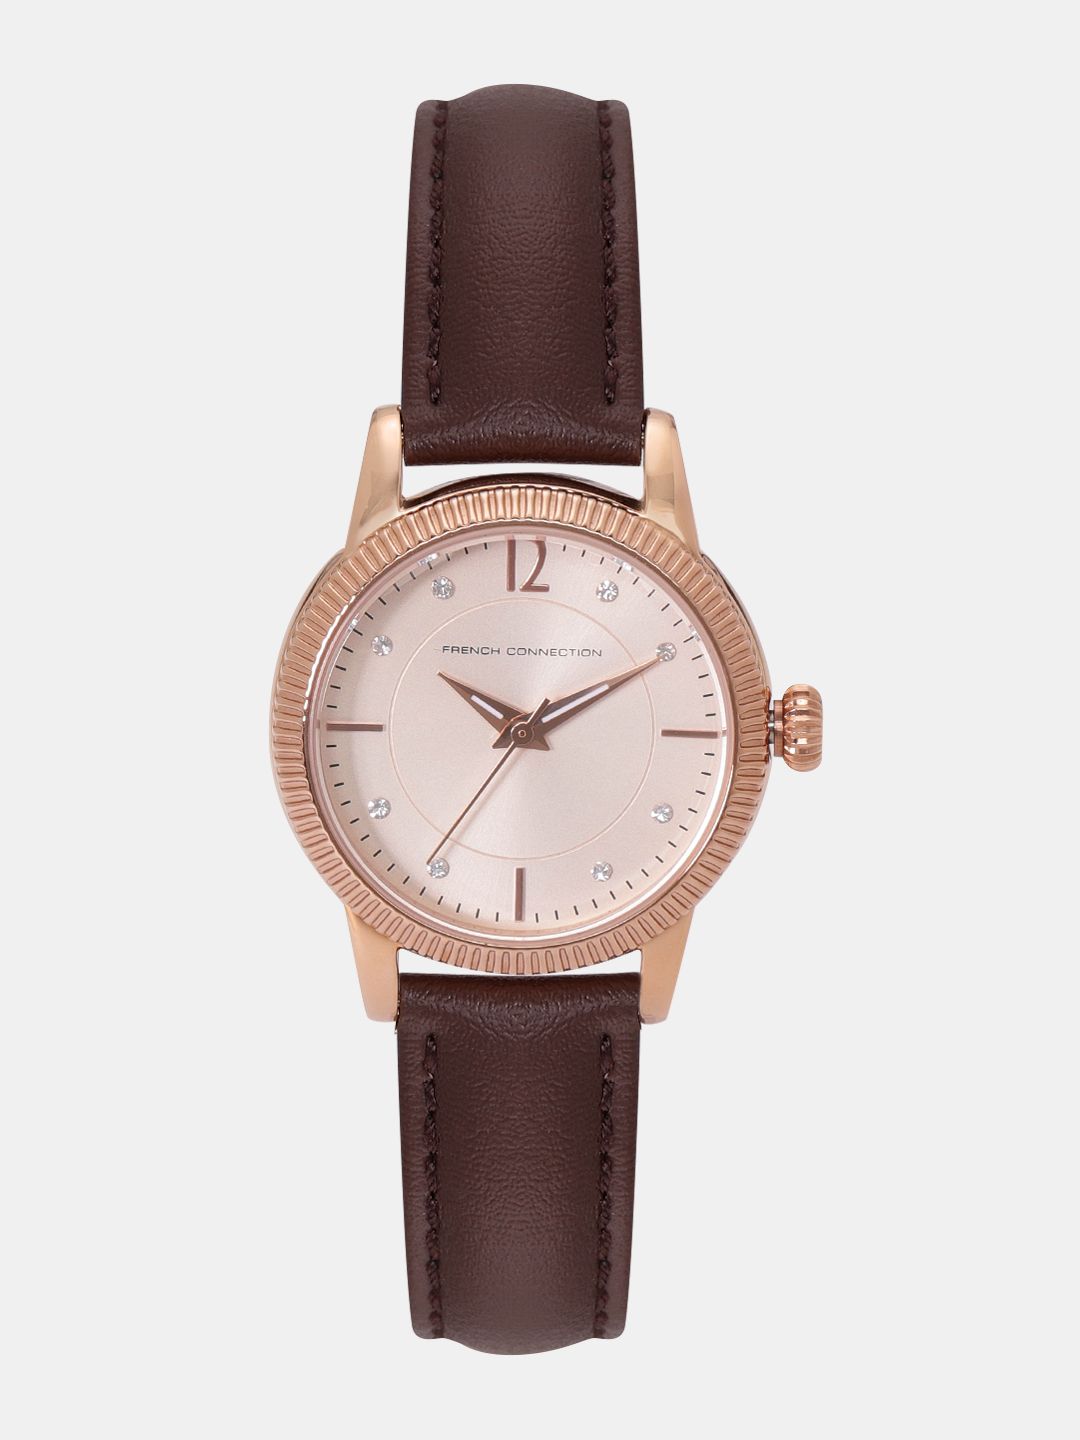 French Connection Women Rose Gold-Toned Analogue Watch FCS1006T Price in India